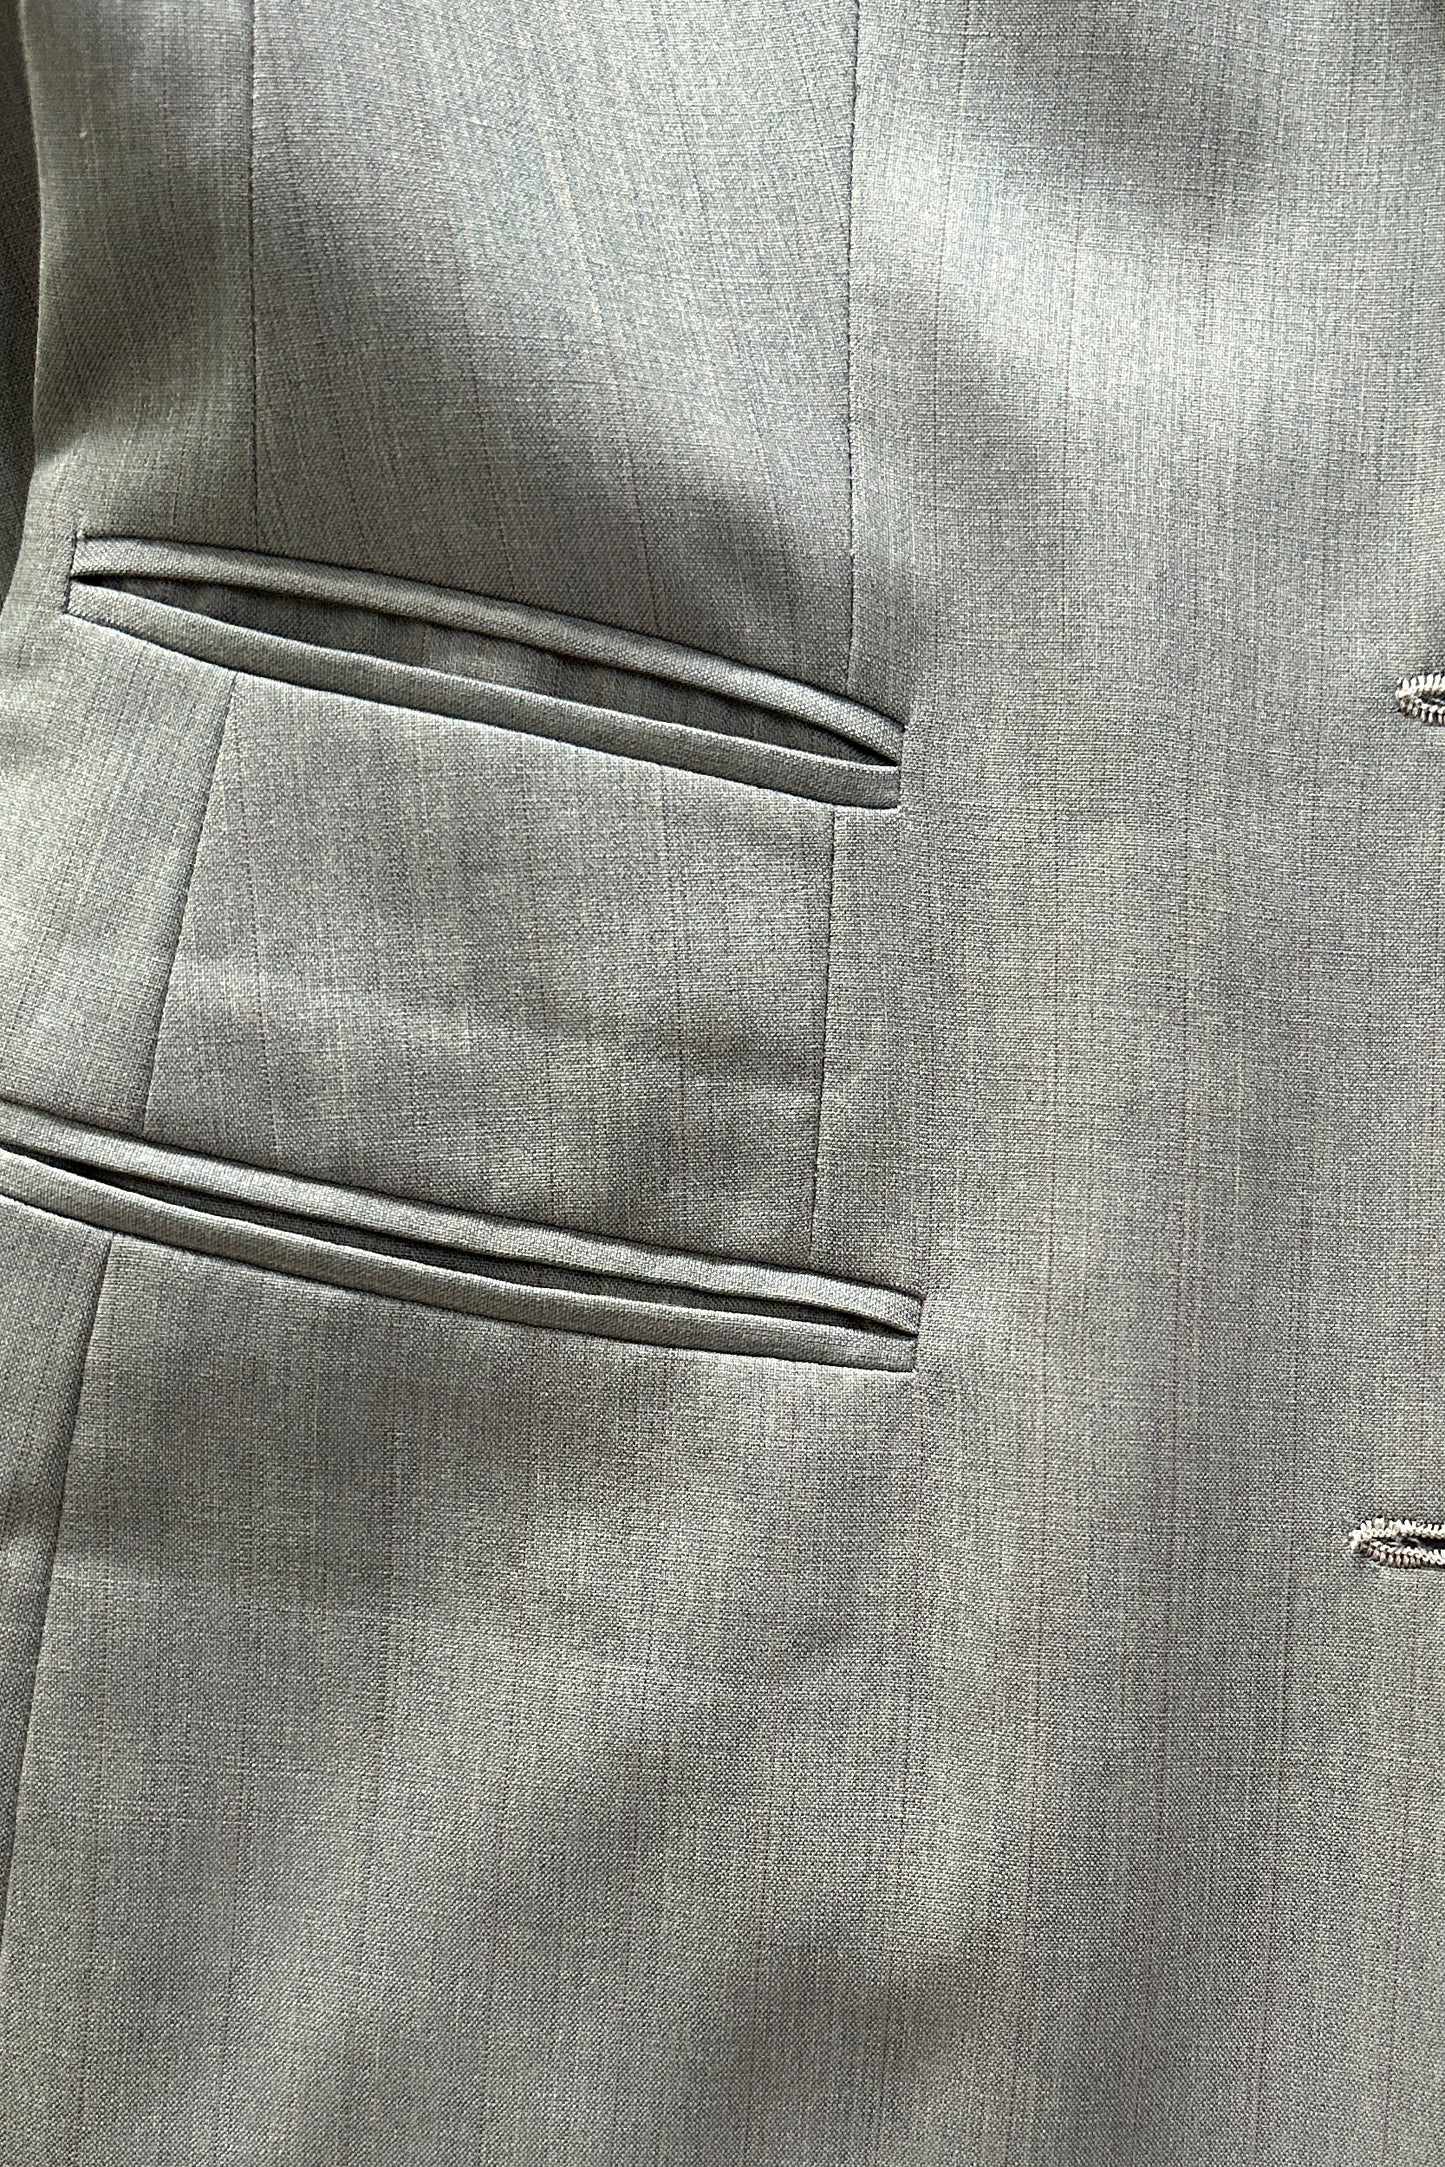 RENT: VINTAGE TAILORED HIGH-WAIST TROUSER SUIT — from £39.75 per week